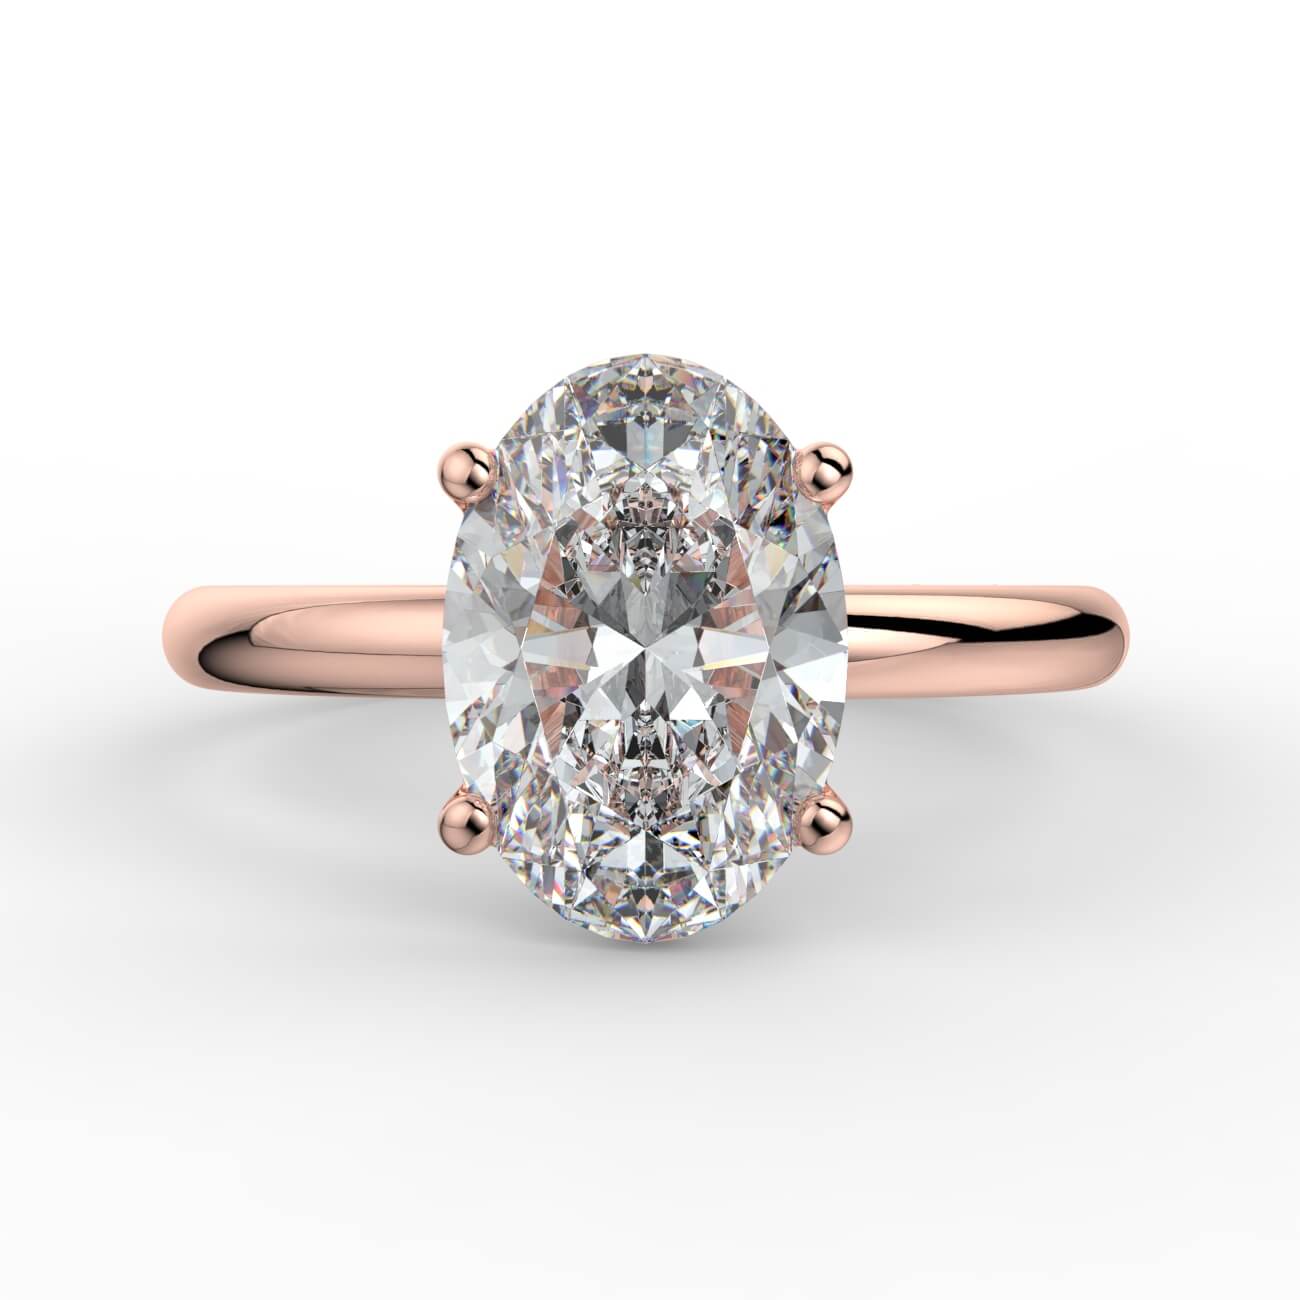 Comfort fit 4 claw oval solitaire diamond ring in rose gold – Australian Diamond Network